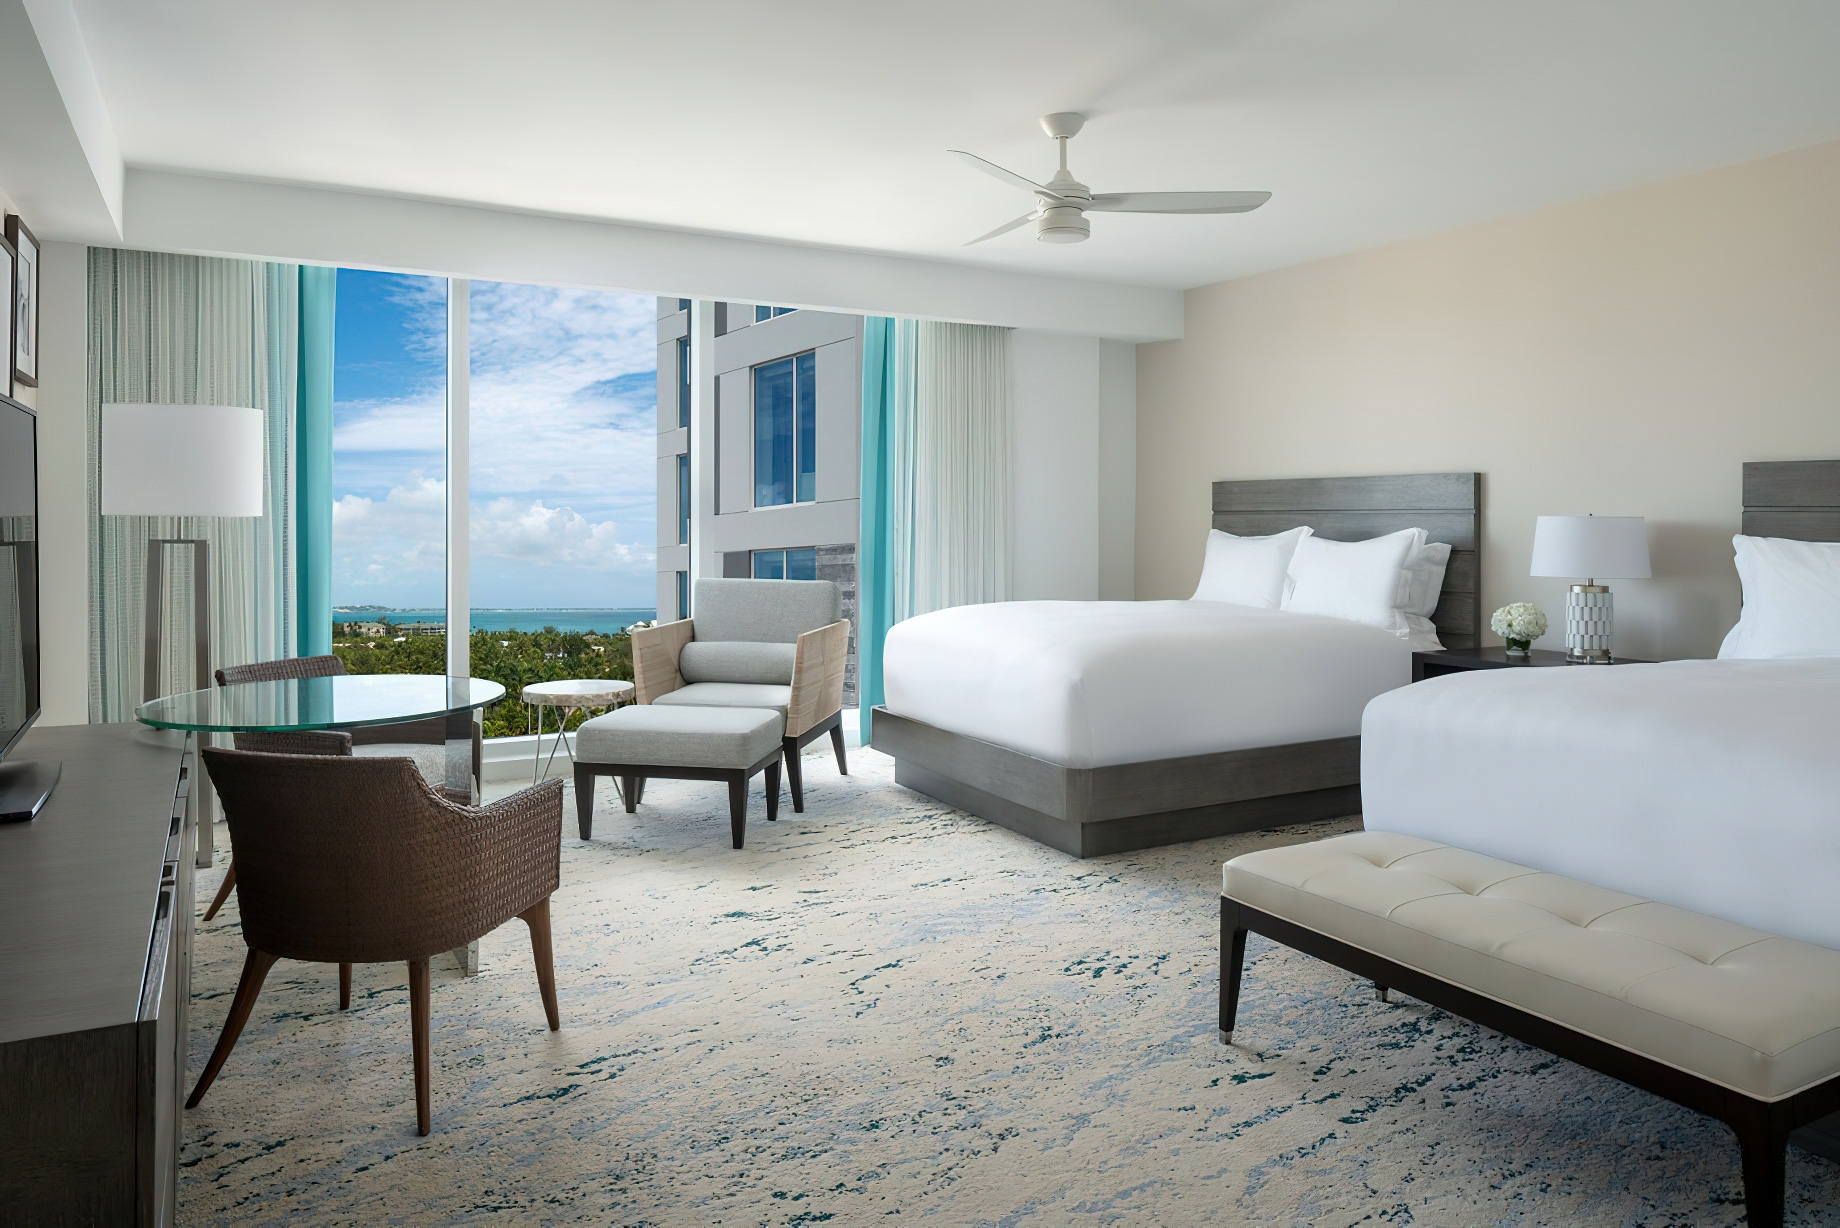 The Ritz-Carlton, Turks & Caicos Resort – Providenciales, Turks and Caicos Islands – Deluxe Oceanfront Limited View Room